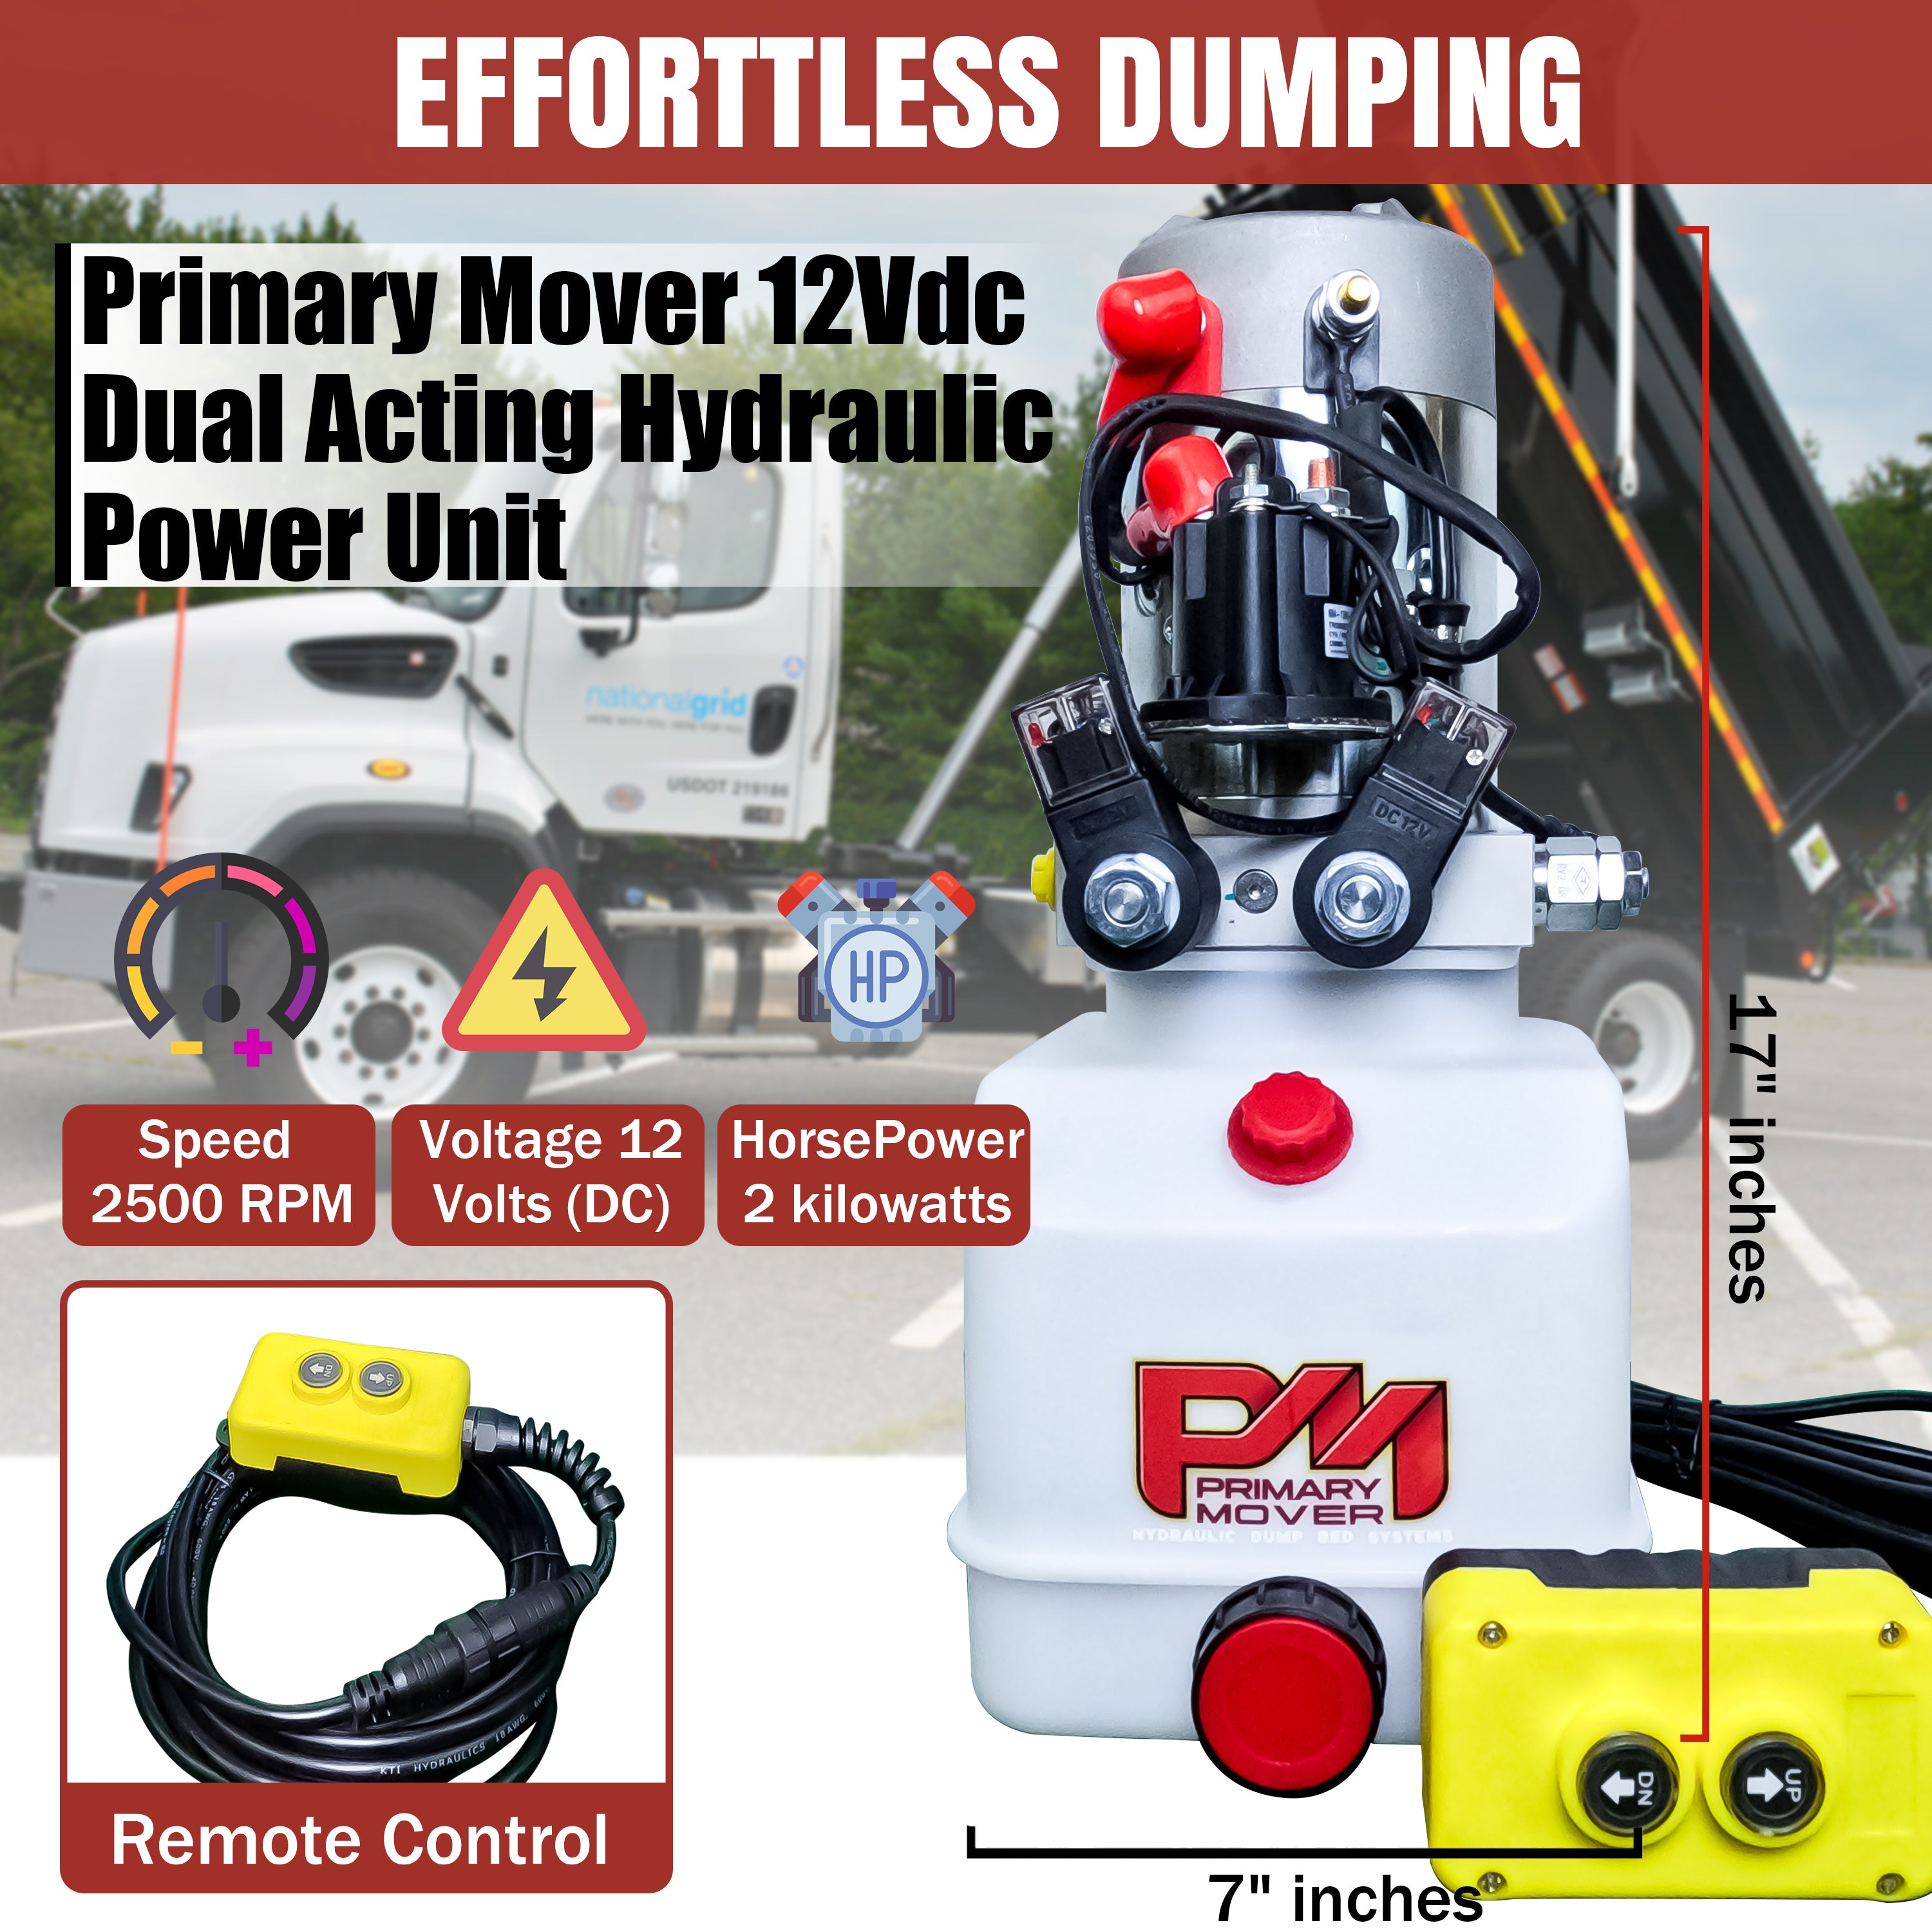 Primary Mover 12V Double-Acting Hydraulic Pump - Poly Reservoir: Precision dual-acting unit for hydraulic dump beds. Crafted for efficiency and durability, with 3200 PSI Max. Relief Setting. Handheld pendant included.